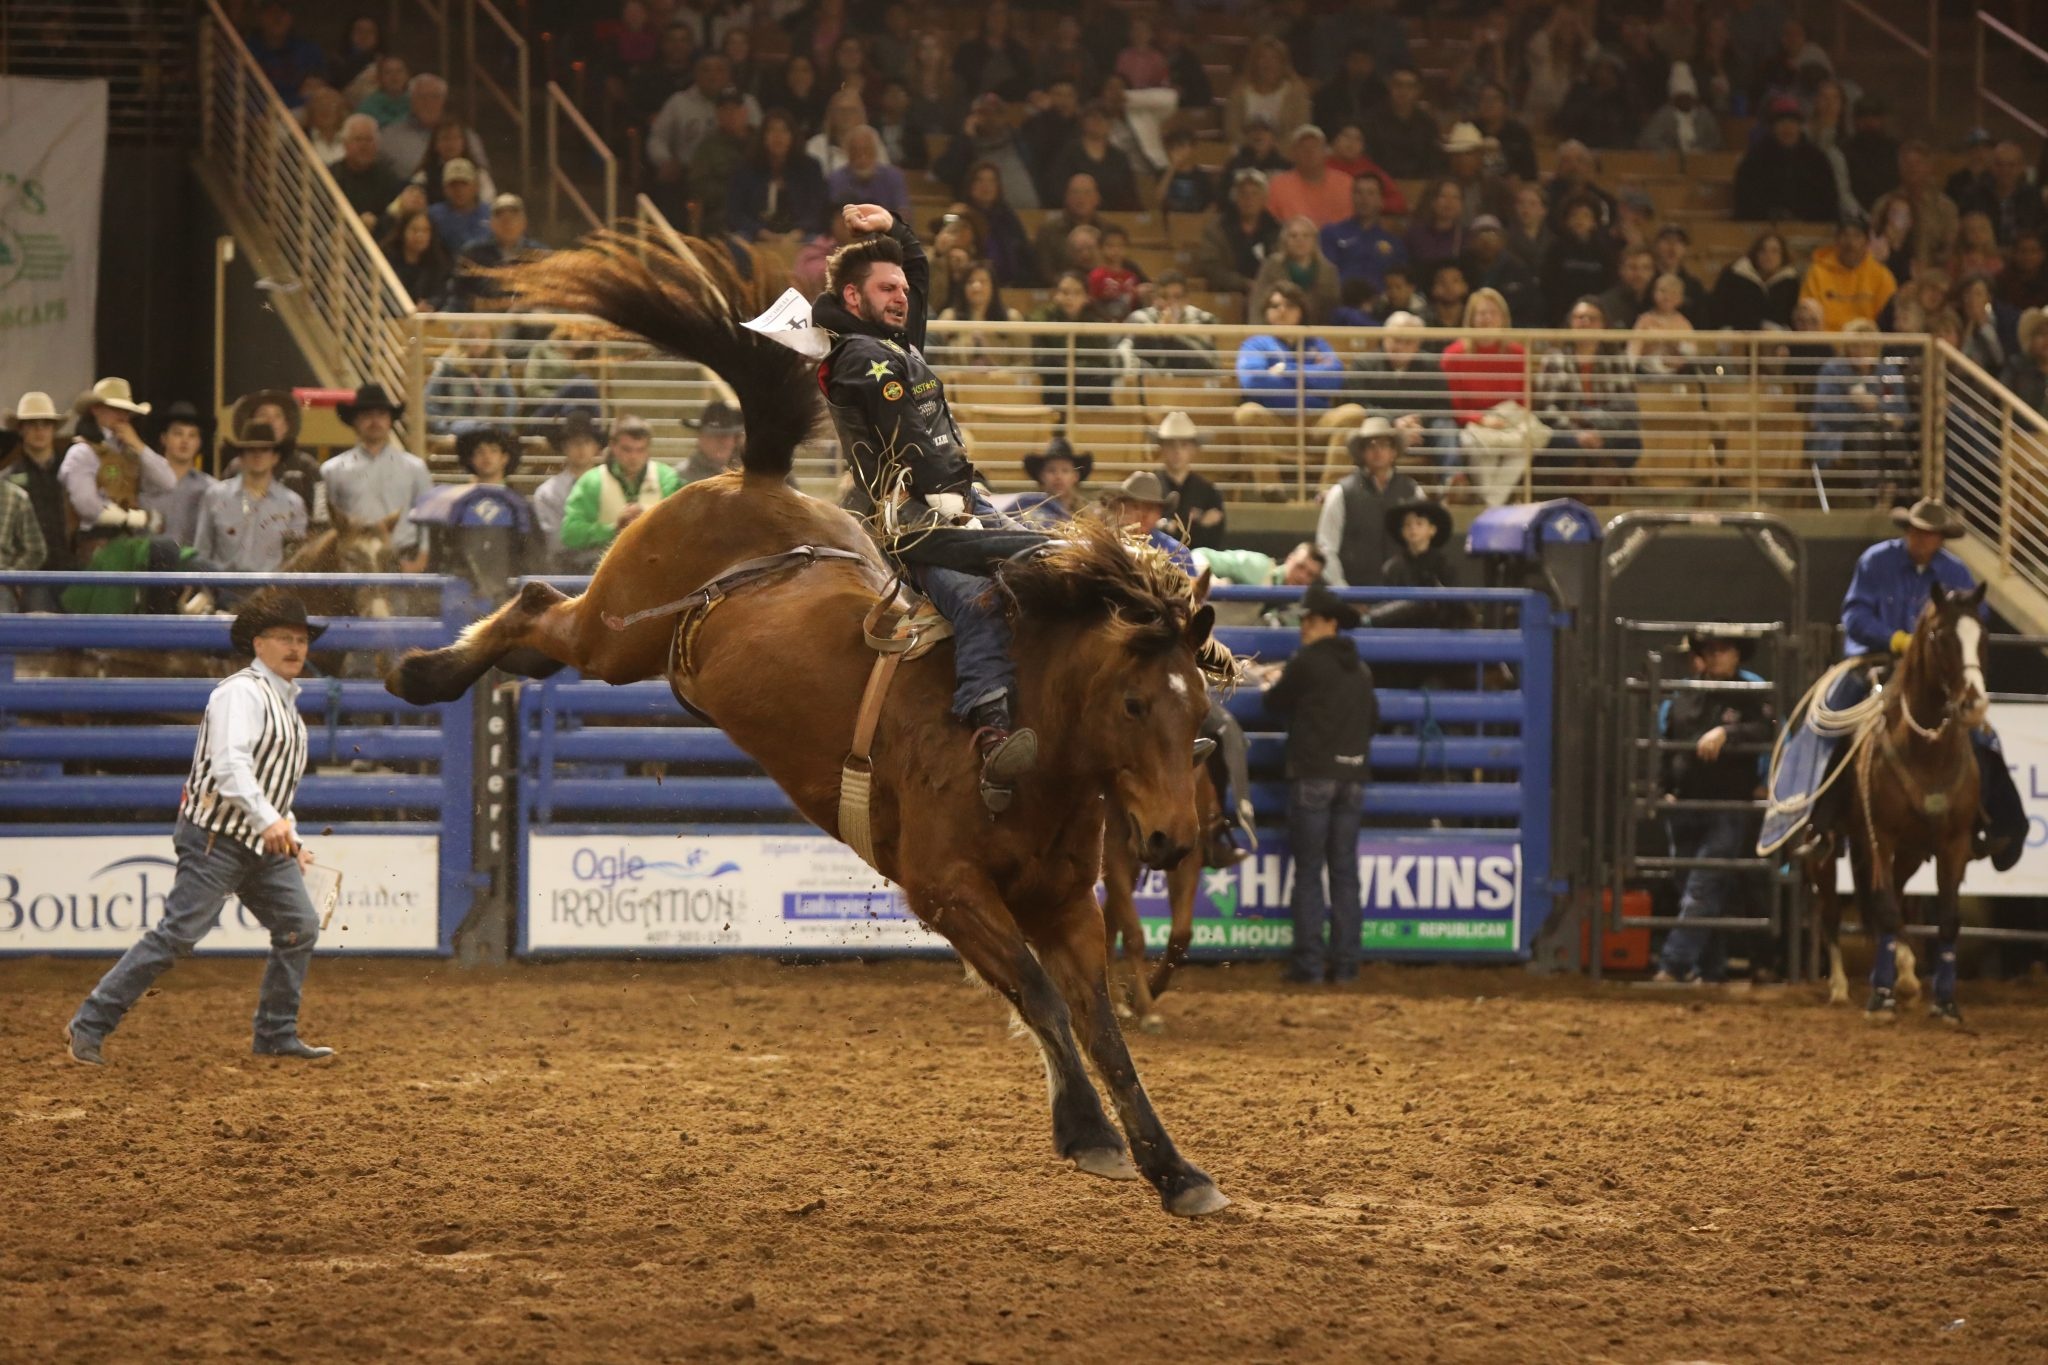 Rodeo: Silver Spurs Rodeo, Kissimmee, Mississippi, Equestrian sport. 2050x1370 HD Wallpaper.